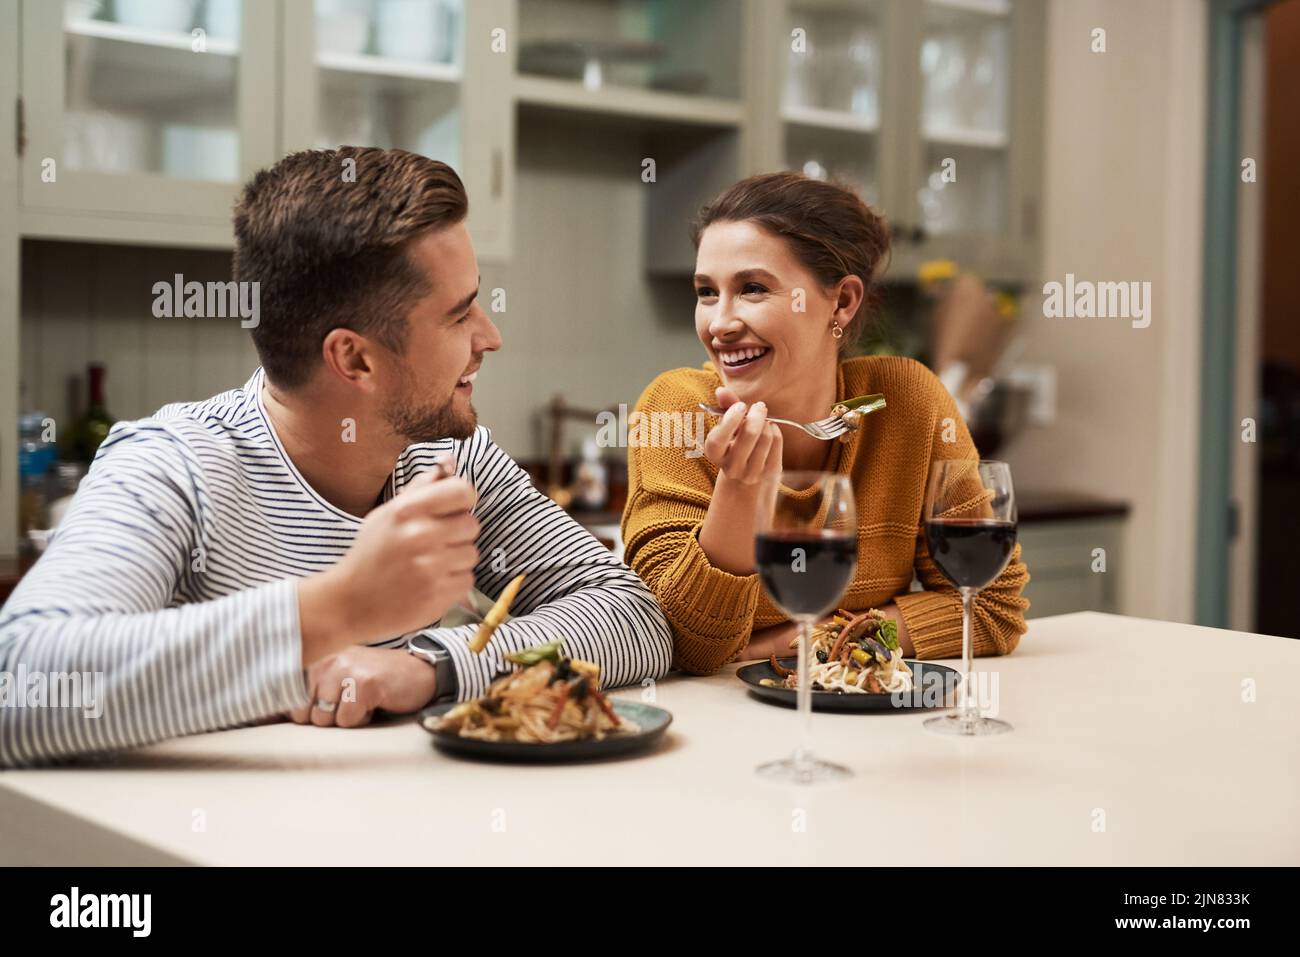 Who doesnt love a home cooked meal. an affectionate young couple smiling at each other while enjoying dinner in their kitchen at home. Stock Photo